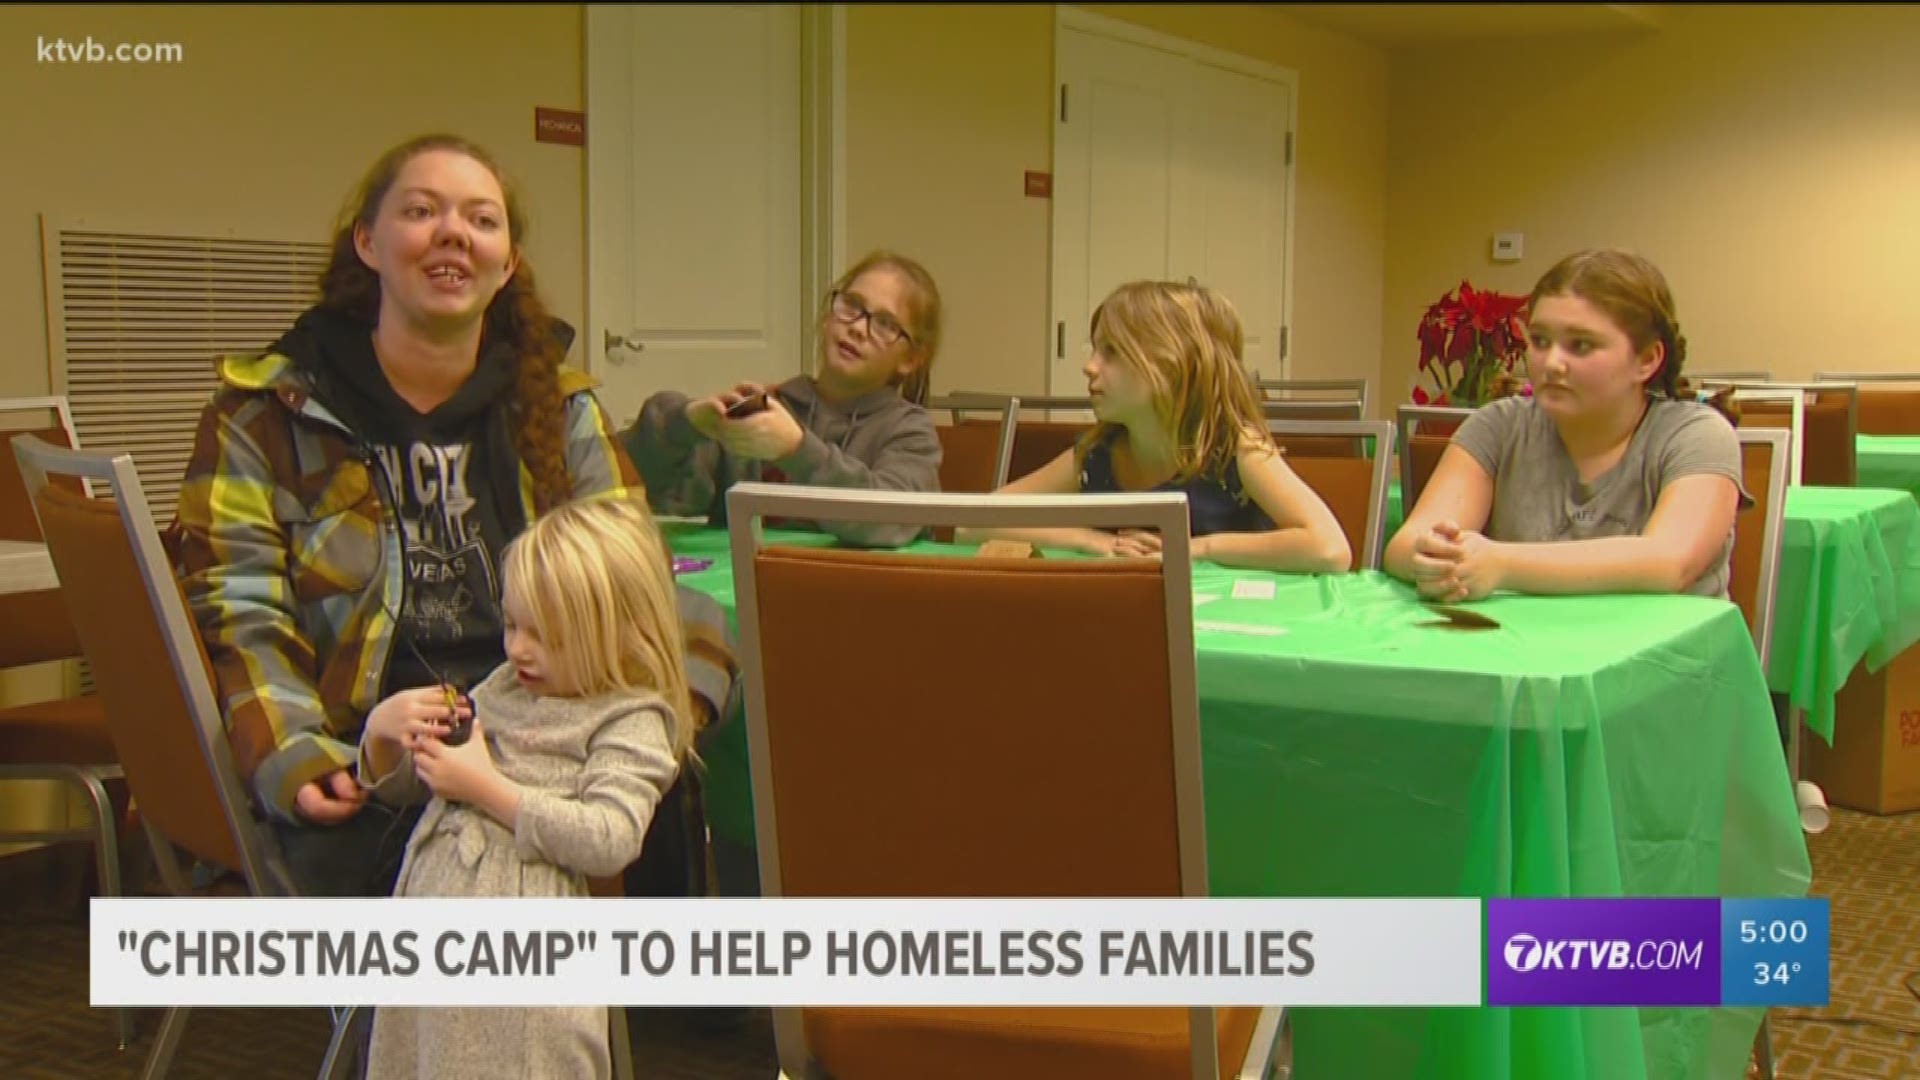 Ten families received a three-night stay at a Boise hotel.